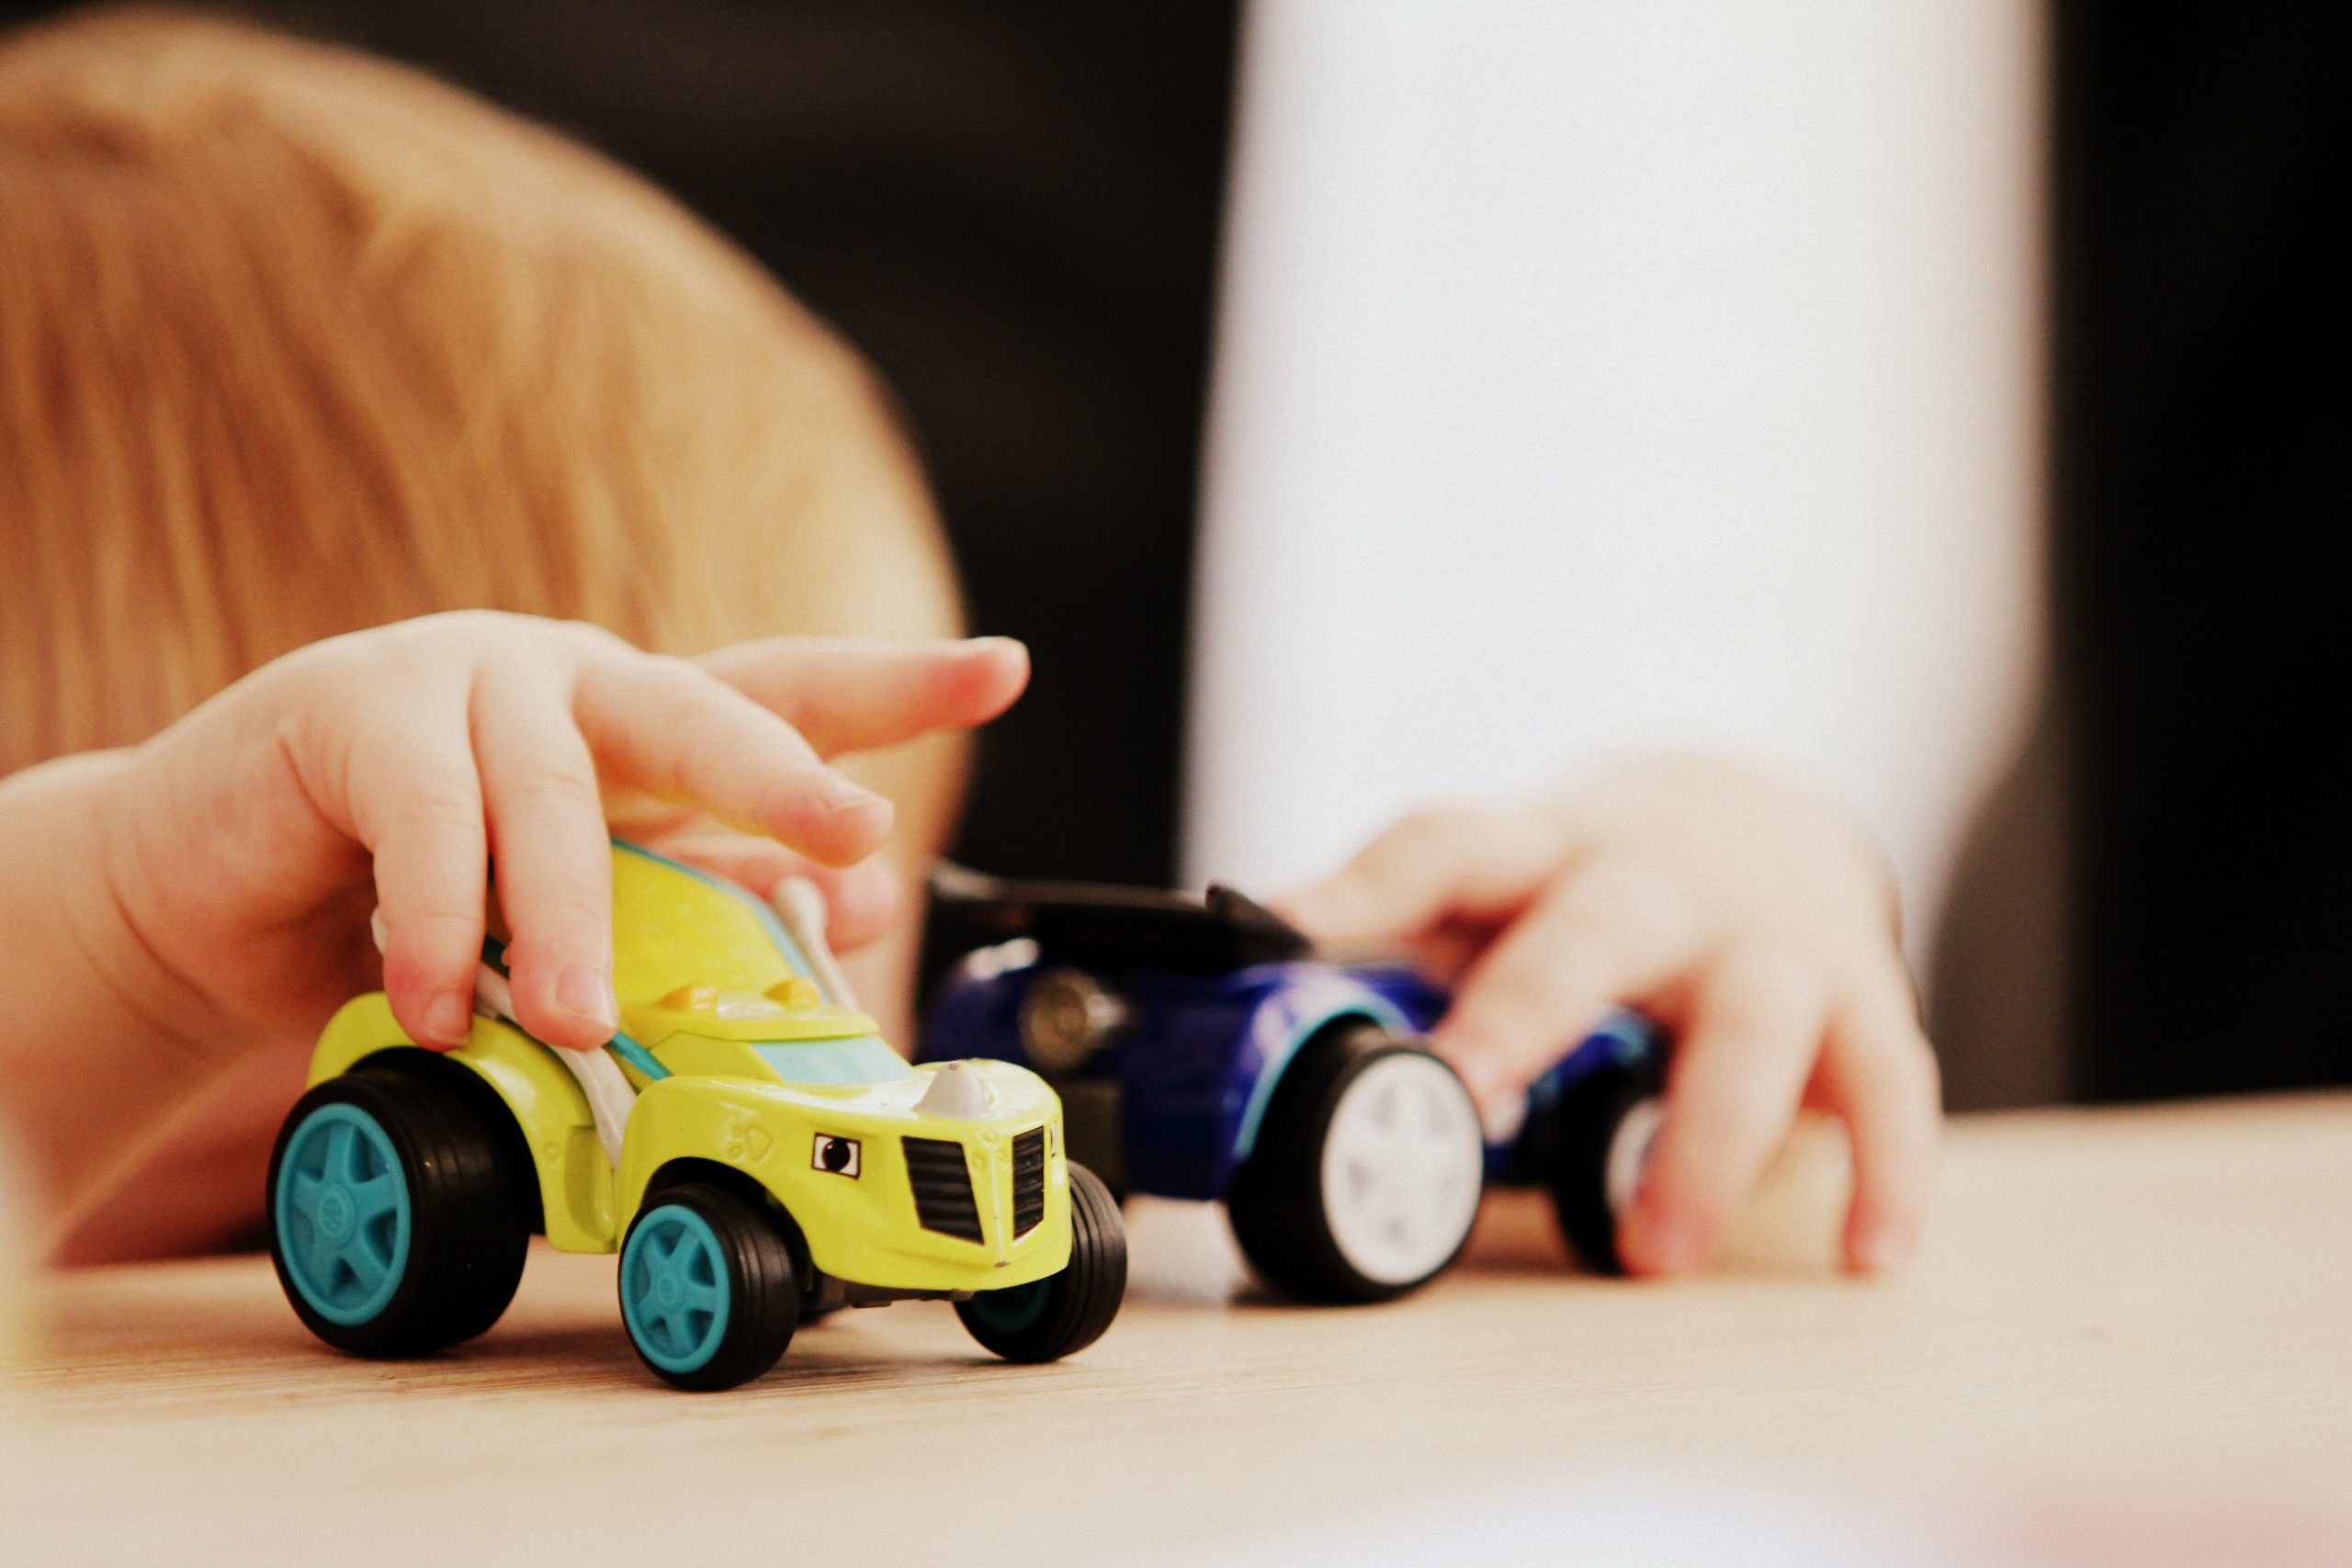 Four-year-old calls the cops, gets police to verify his toys are cool